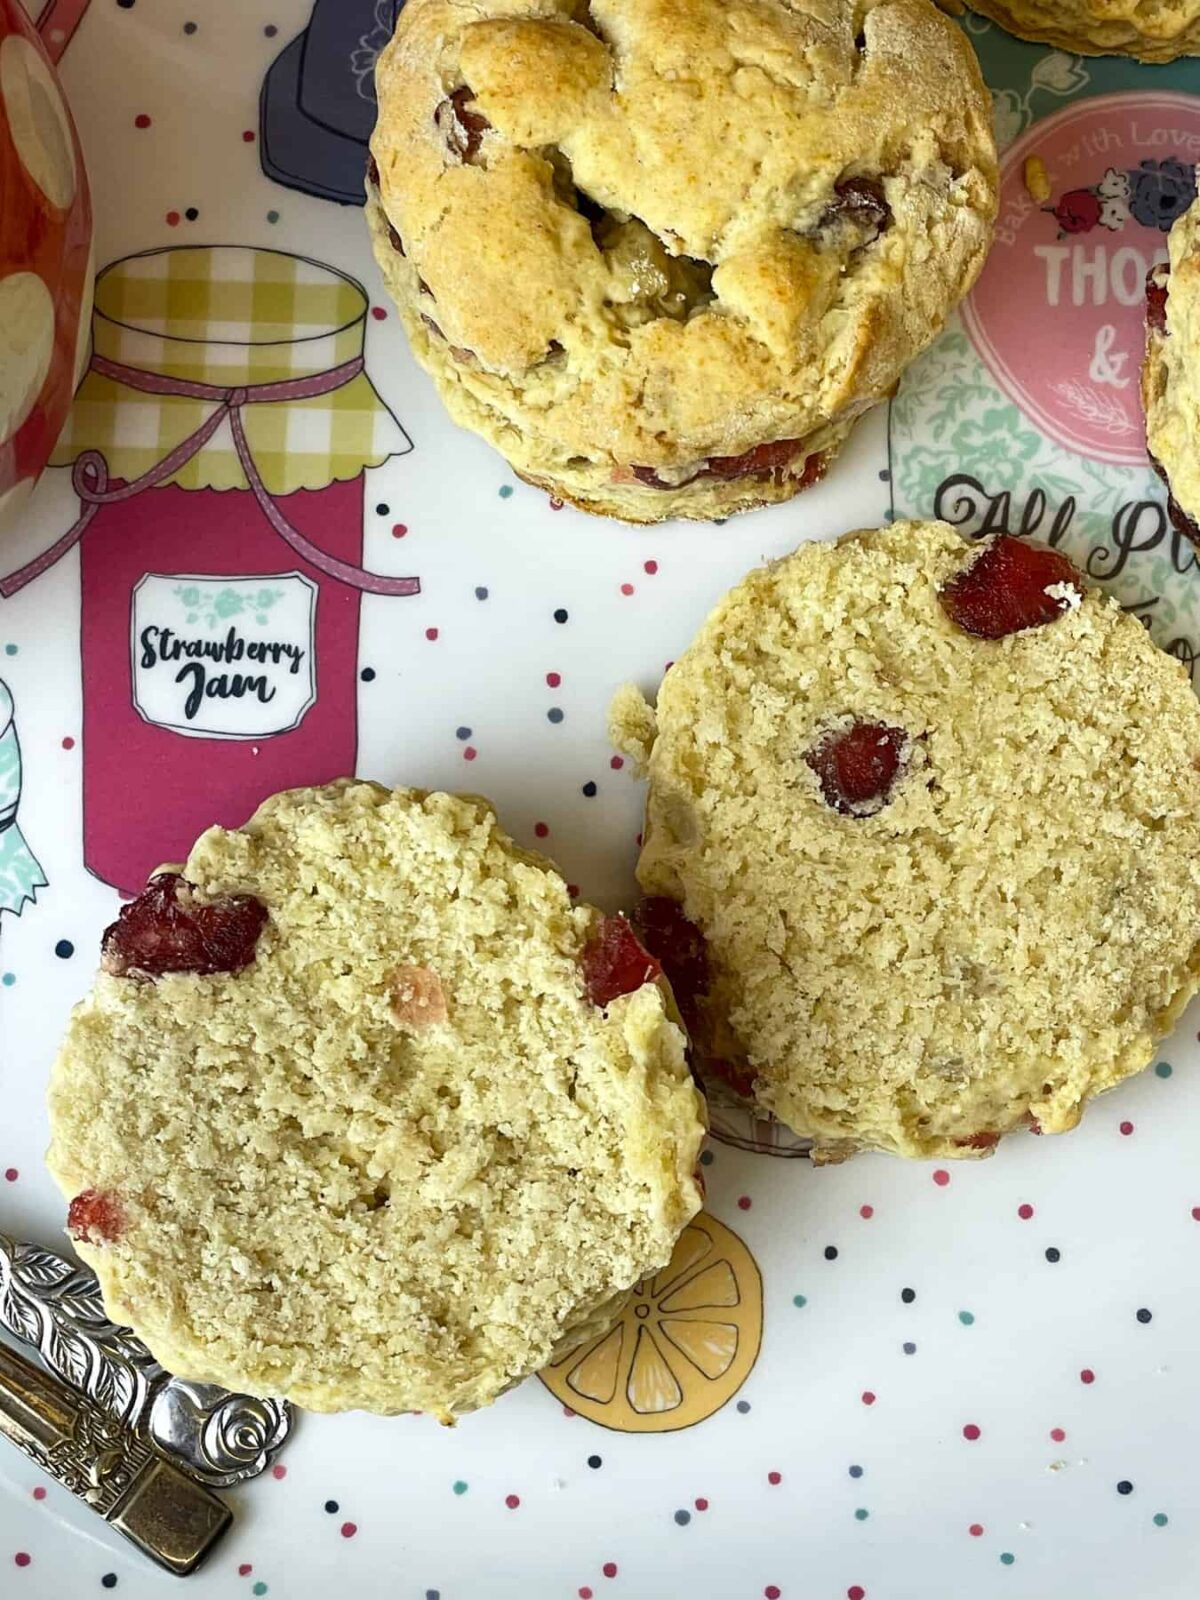 A cherry scone on a tea tray with images of jam pots and a speckled pattern, the scone is halved and a whole scone is in the background.